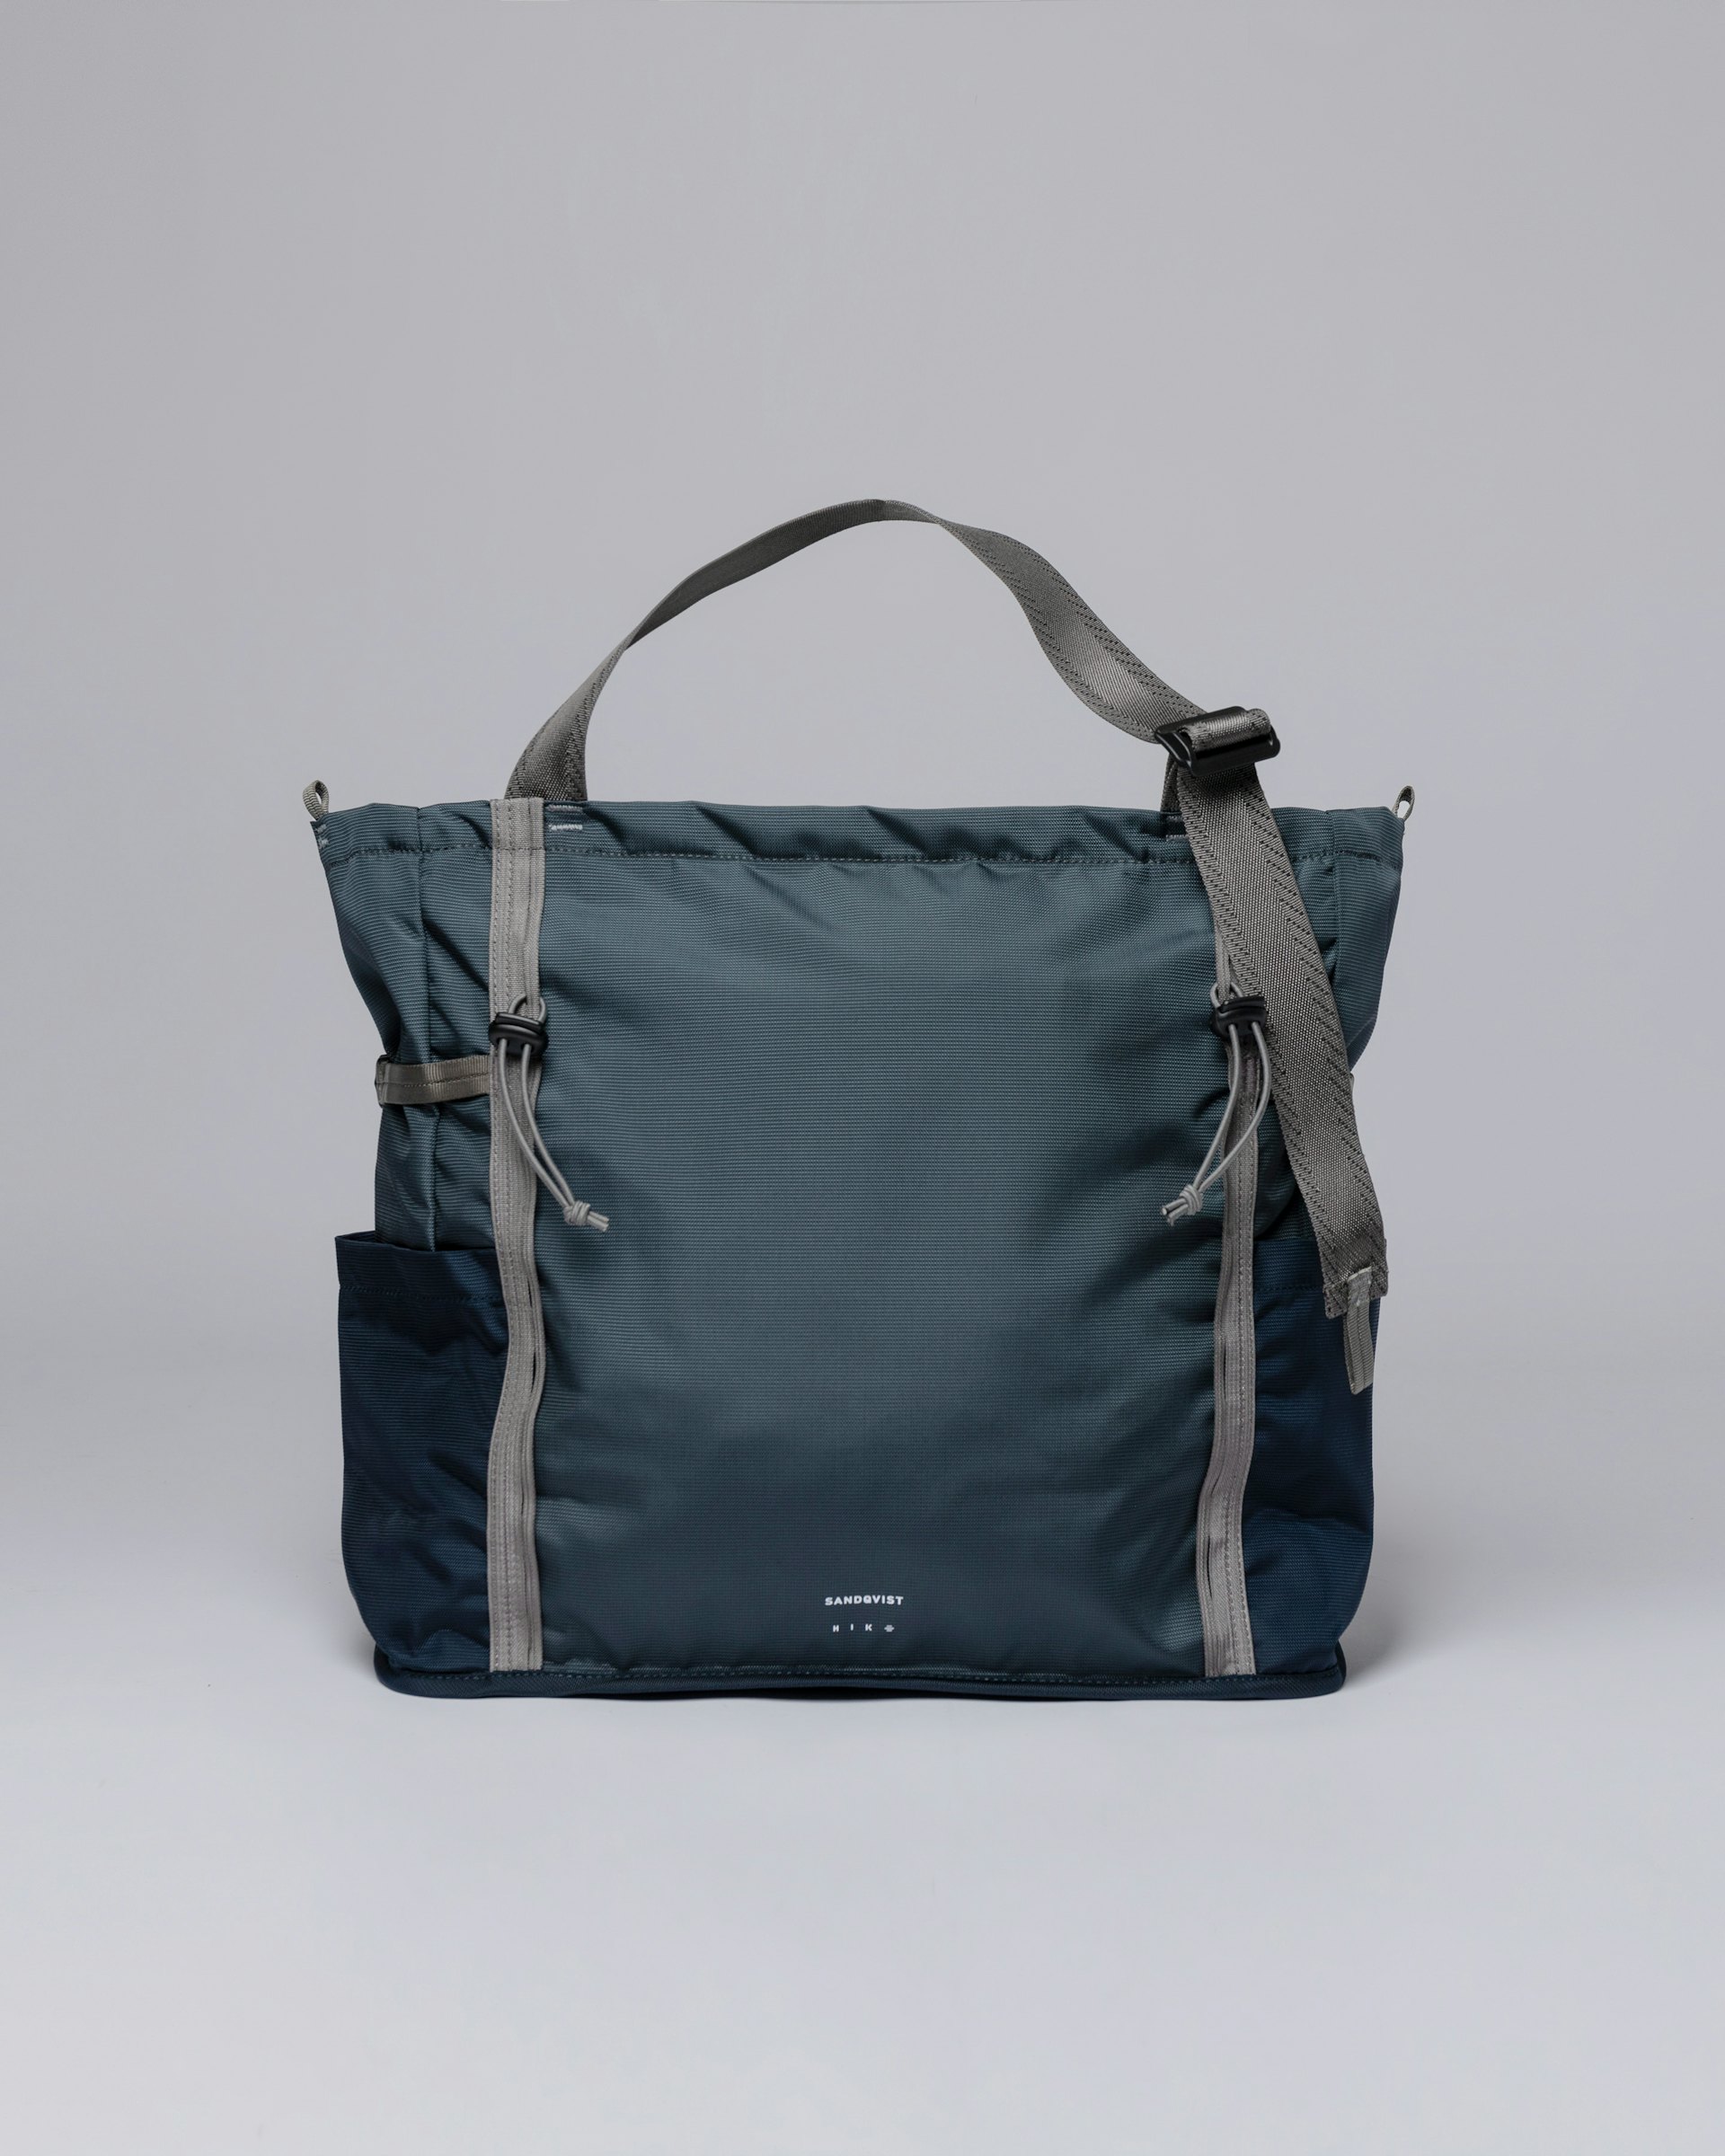 River Hike belongs to the category Tote bags and is in color steel blue & navy (1 of 5)